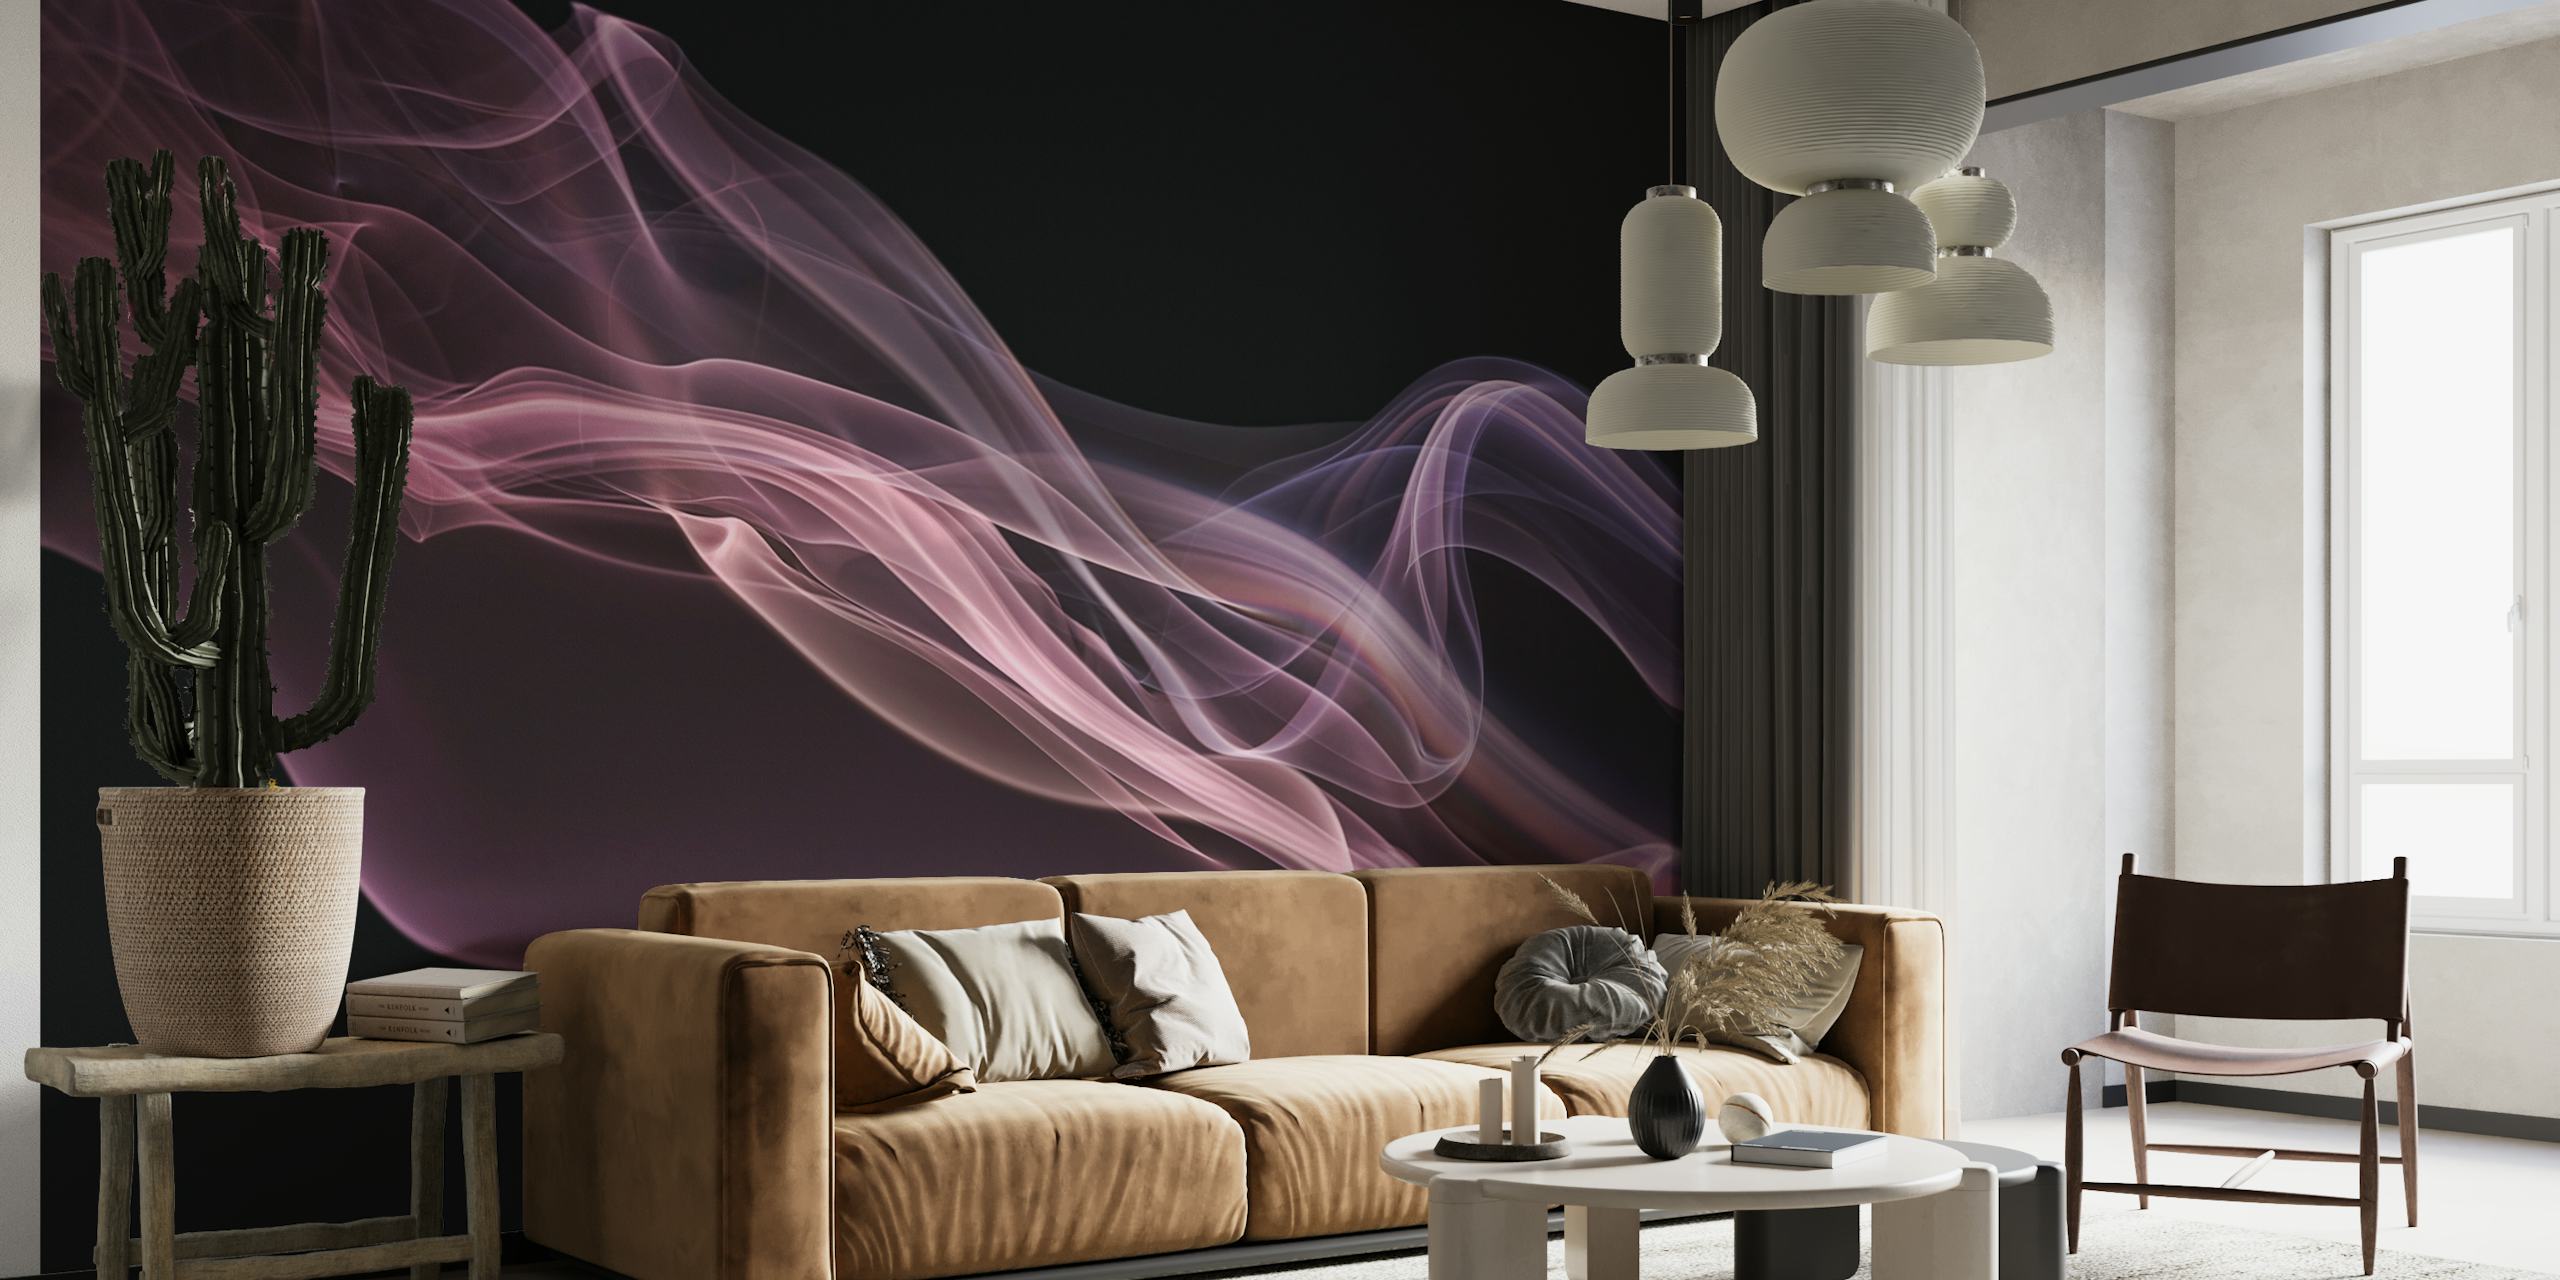 Elegant abstract wall mural with purple wisps floating on a pink background